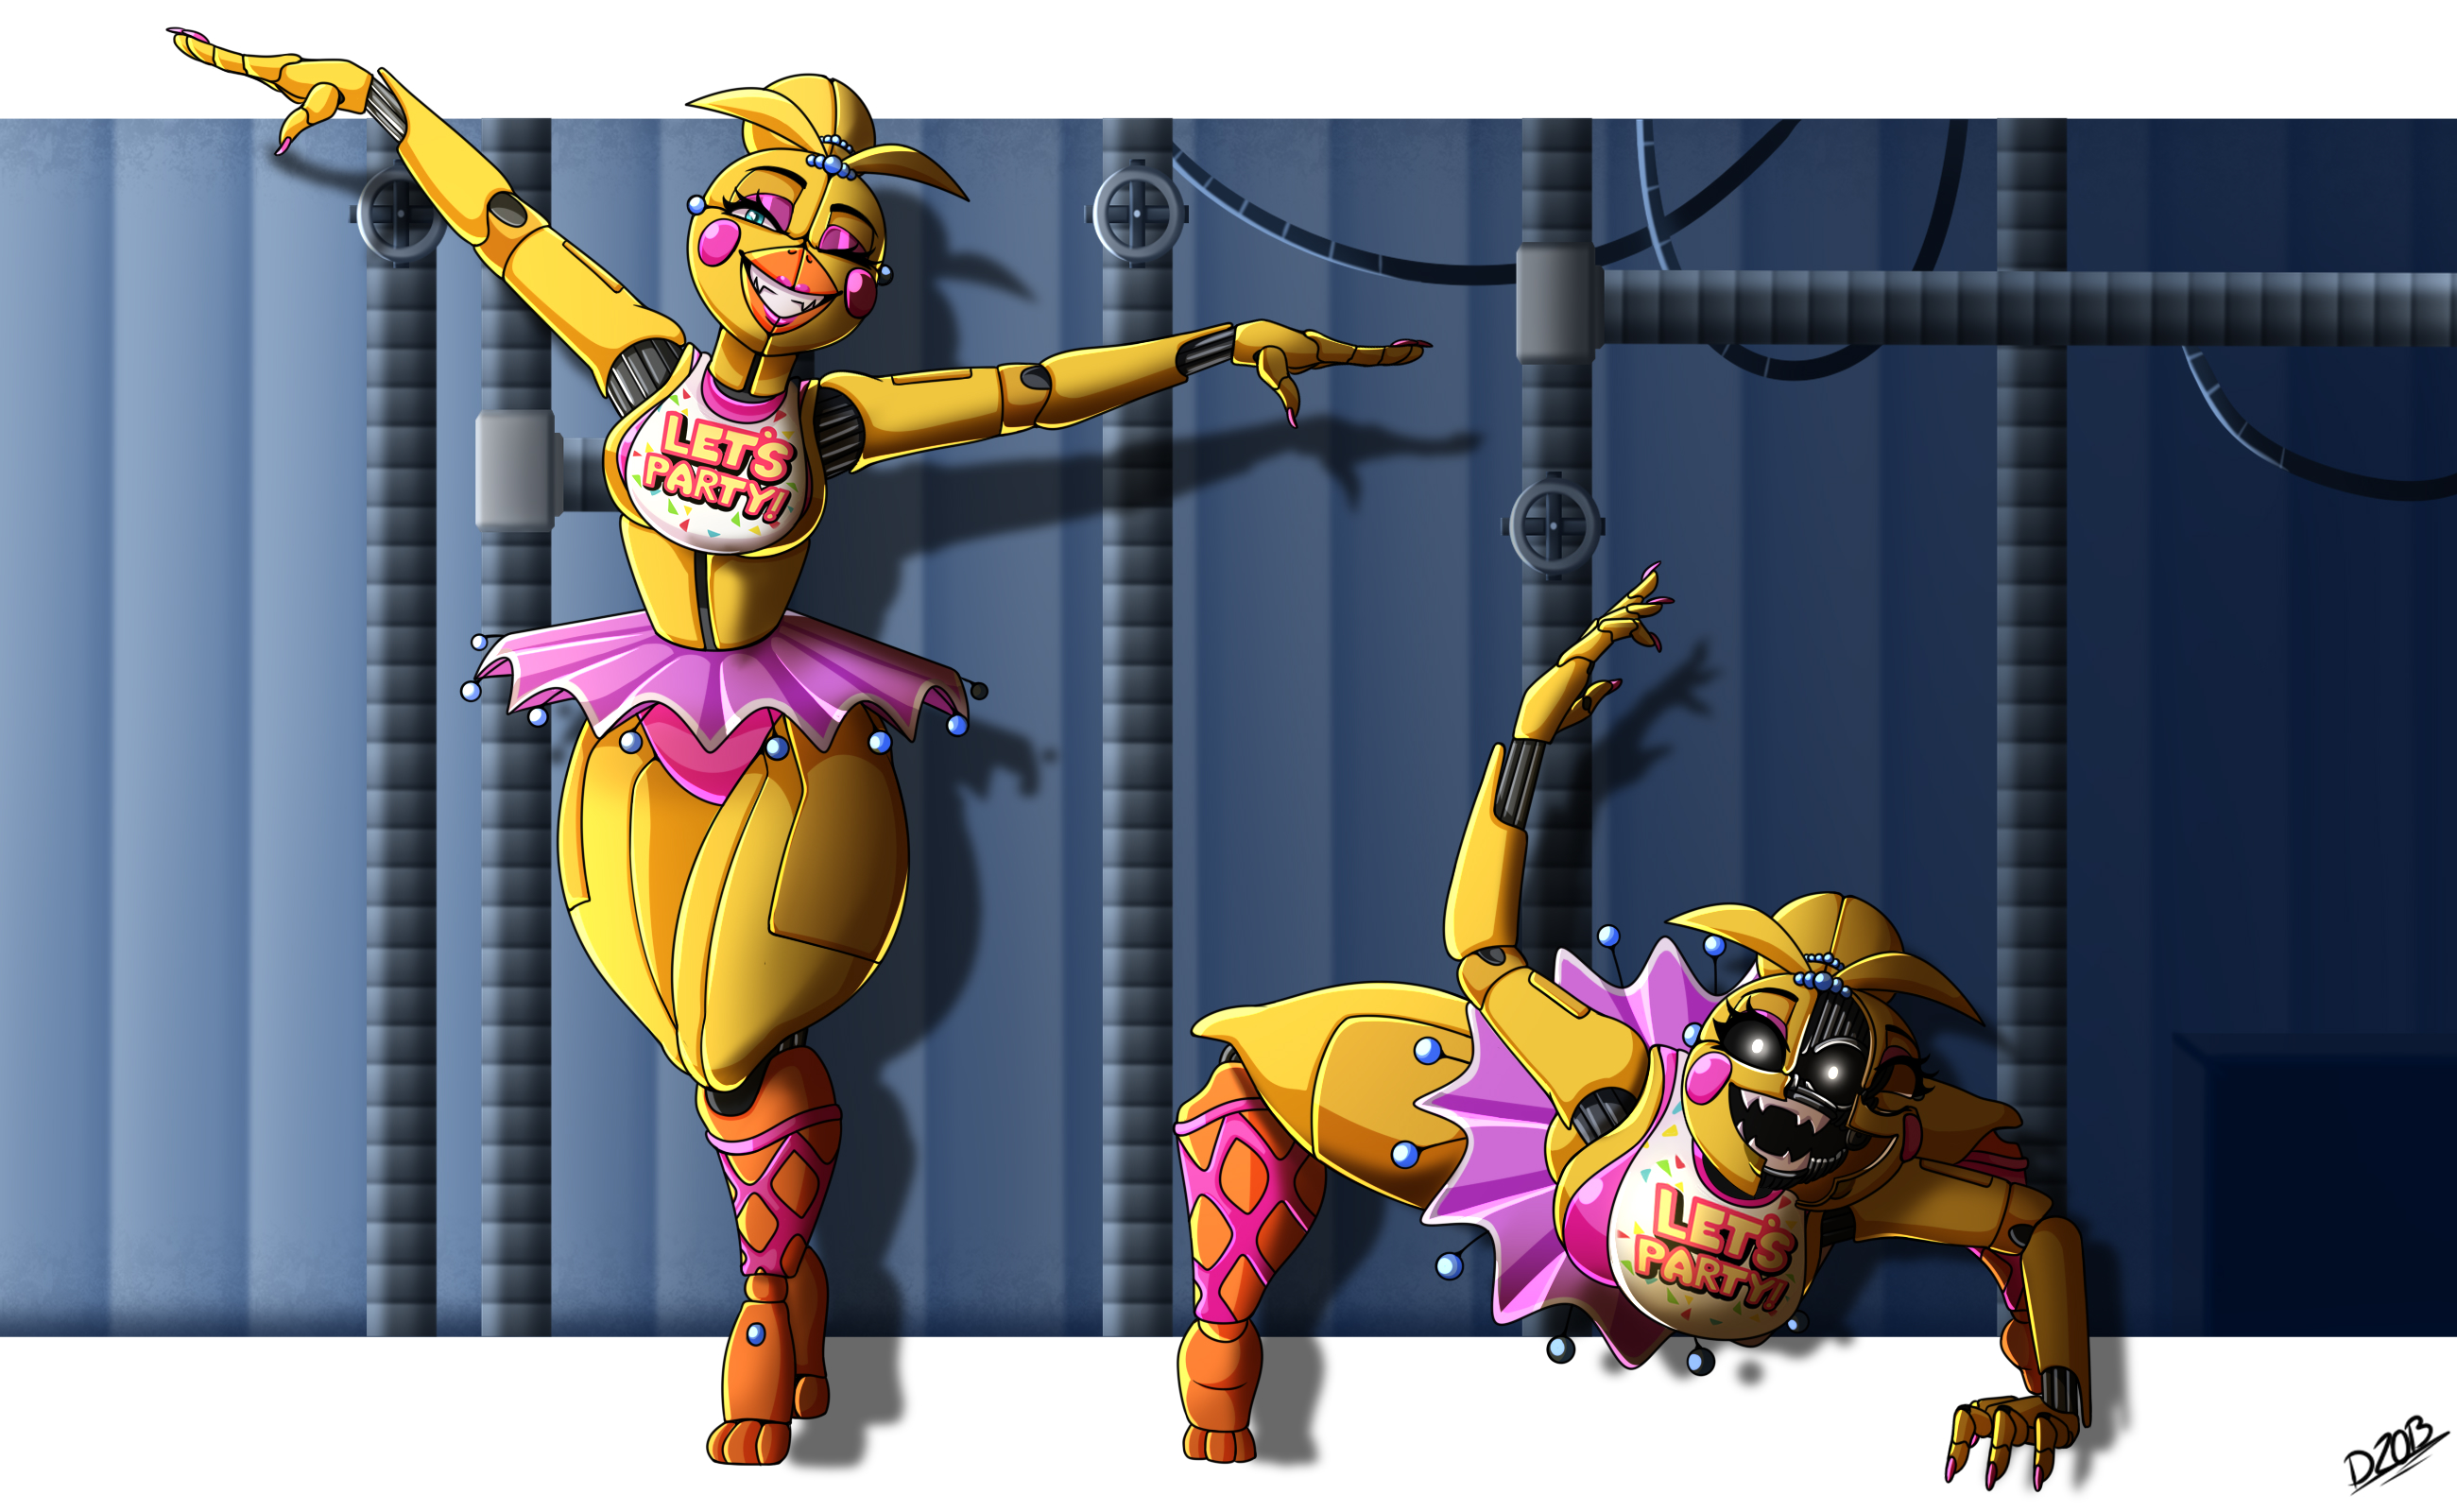 FNAF/SFM] FNAF6 Funtime Chica Salvage - View from animatronic